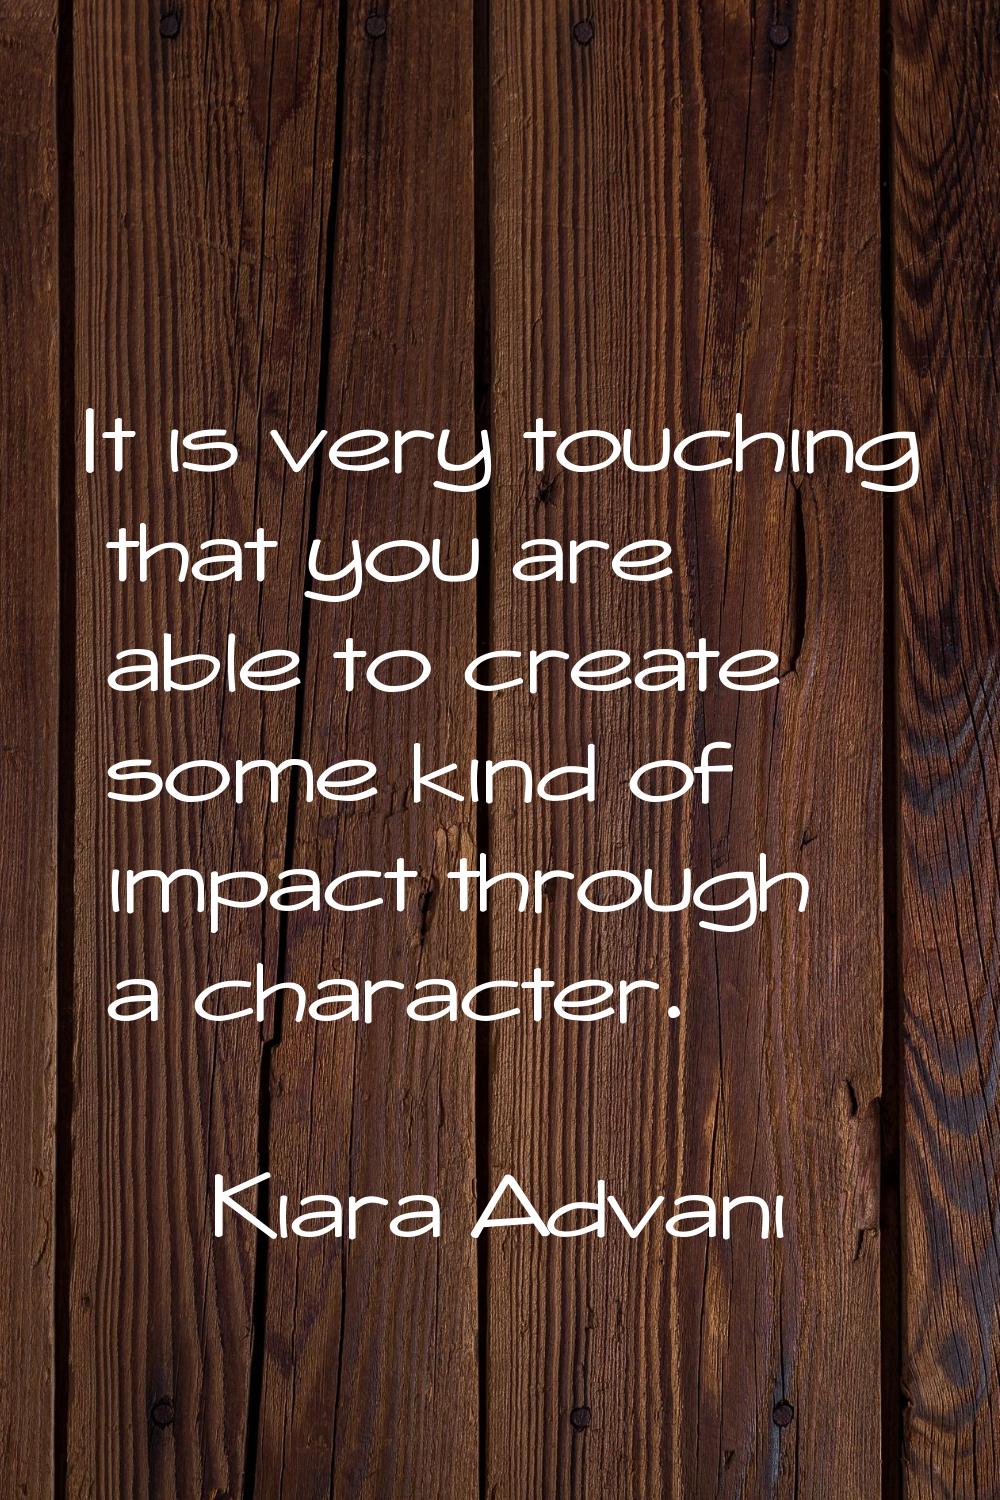 It is very touching that you are able to create some kind of impact through a character.